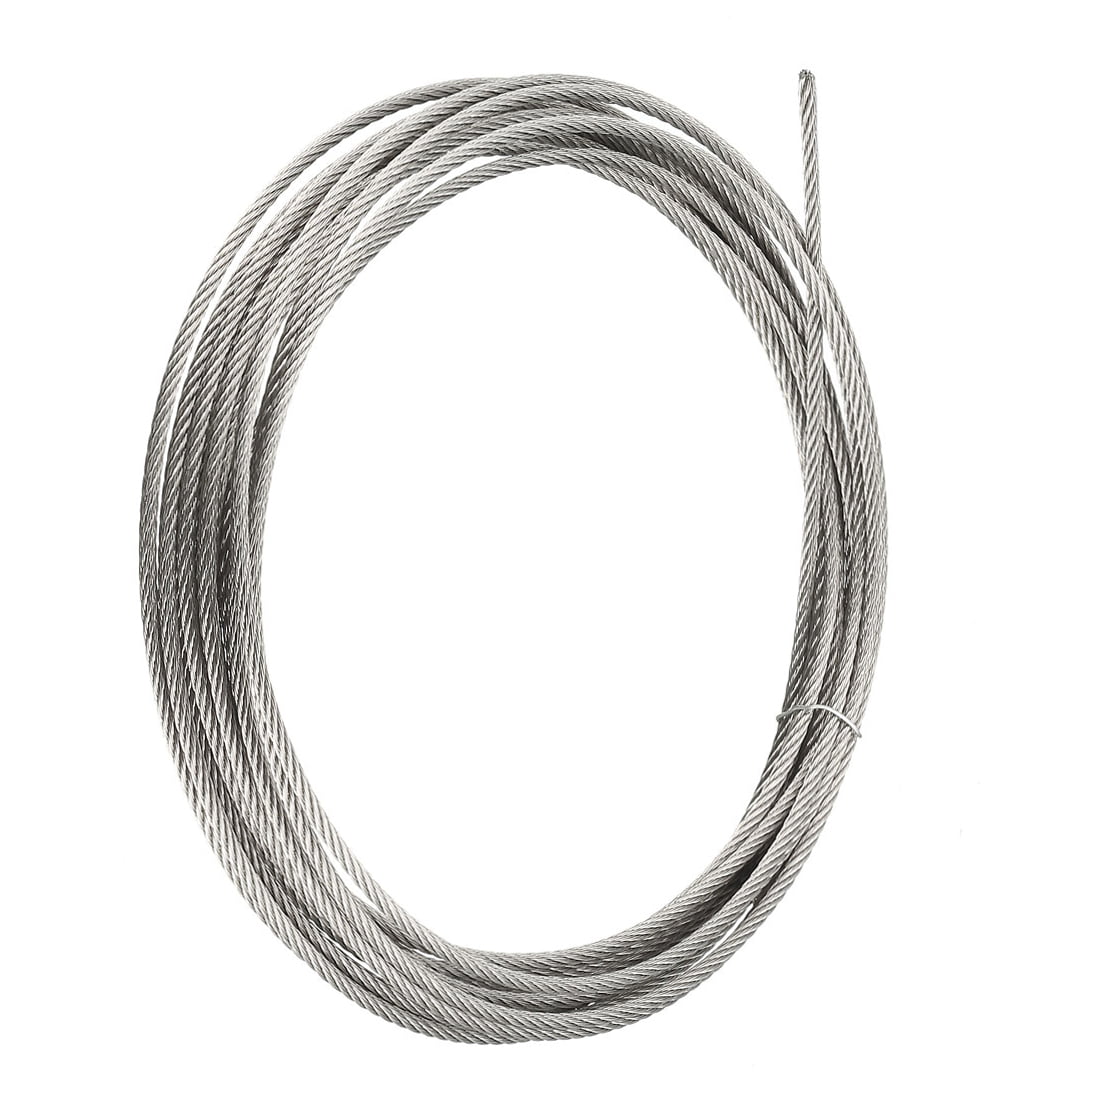 Uxcell 1mm Dia 7x7 25m Long Flexible Stainless Steel Wire Cable for Grind